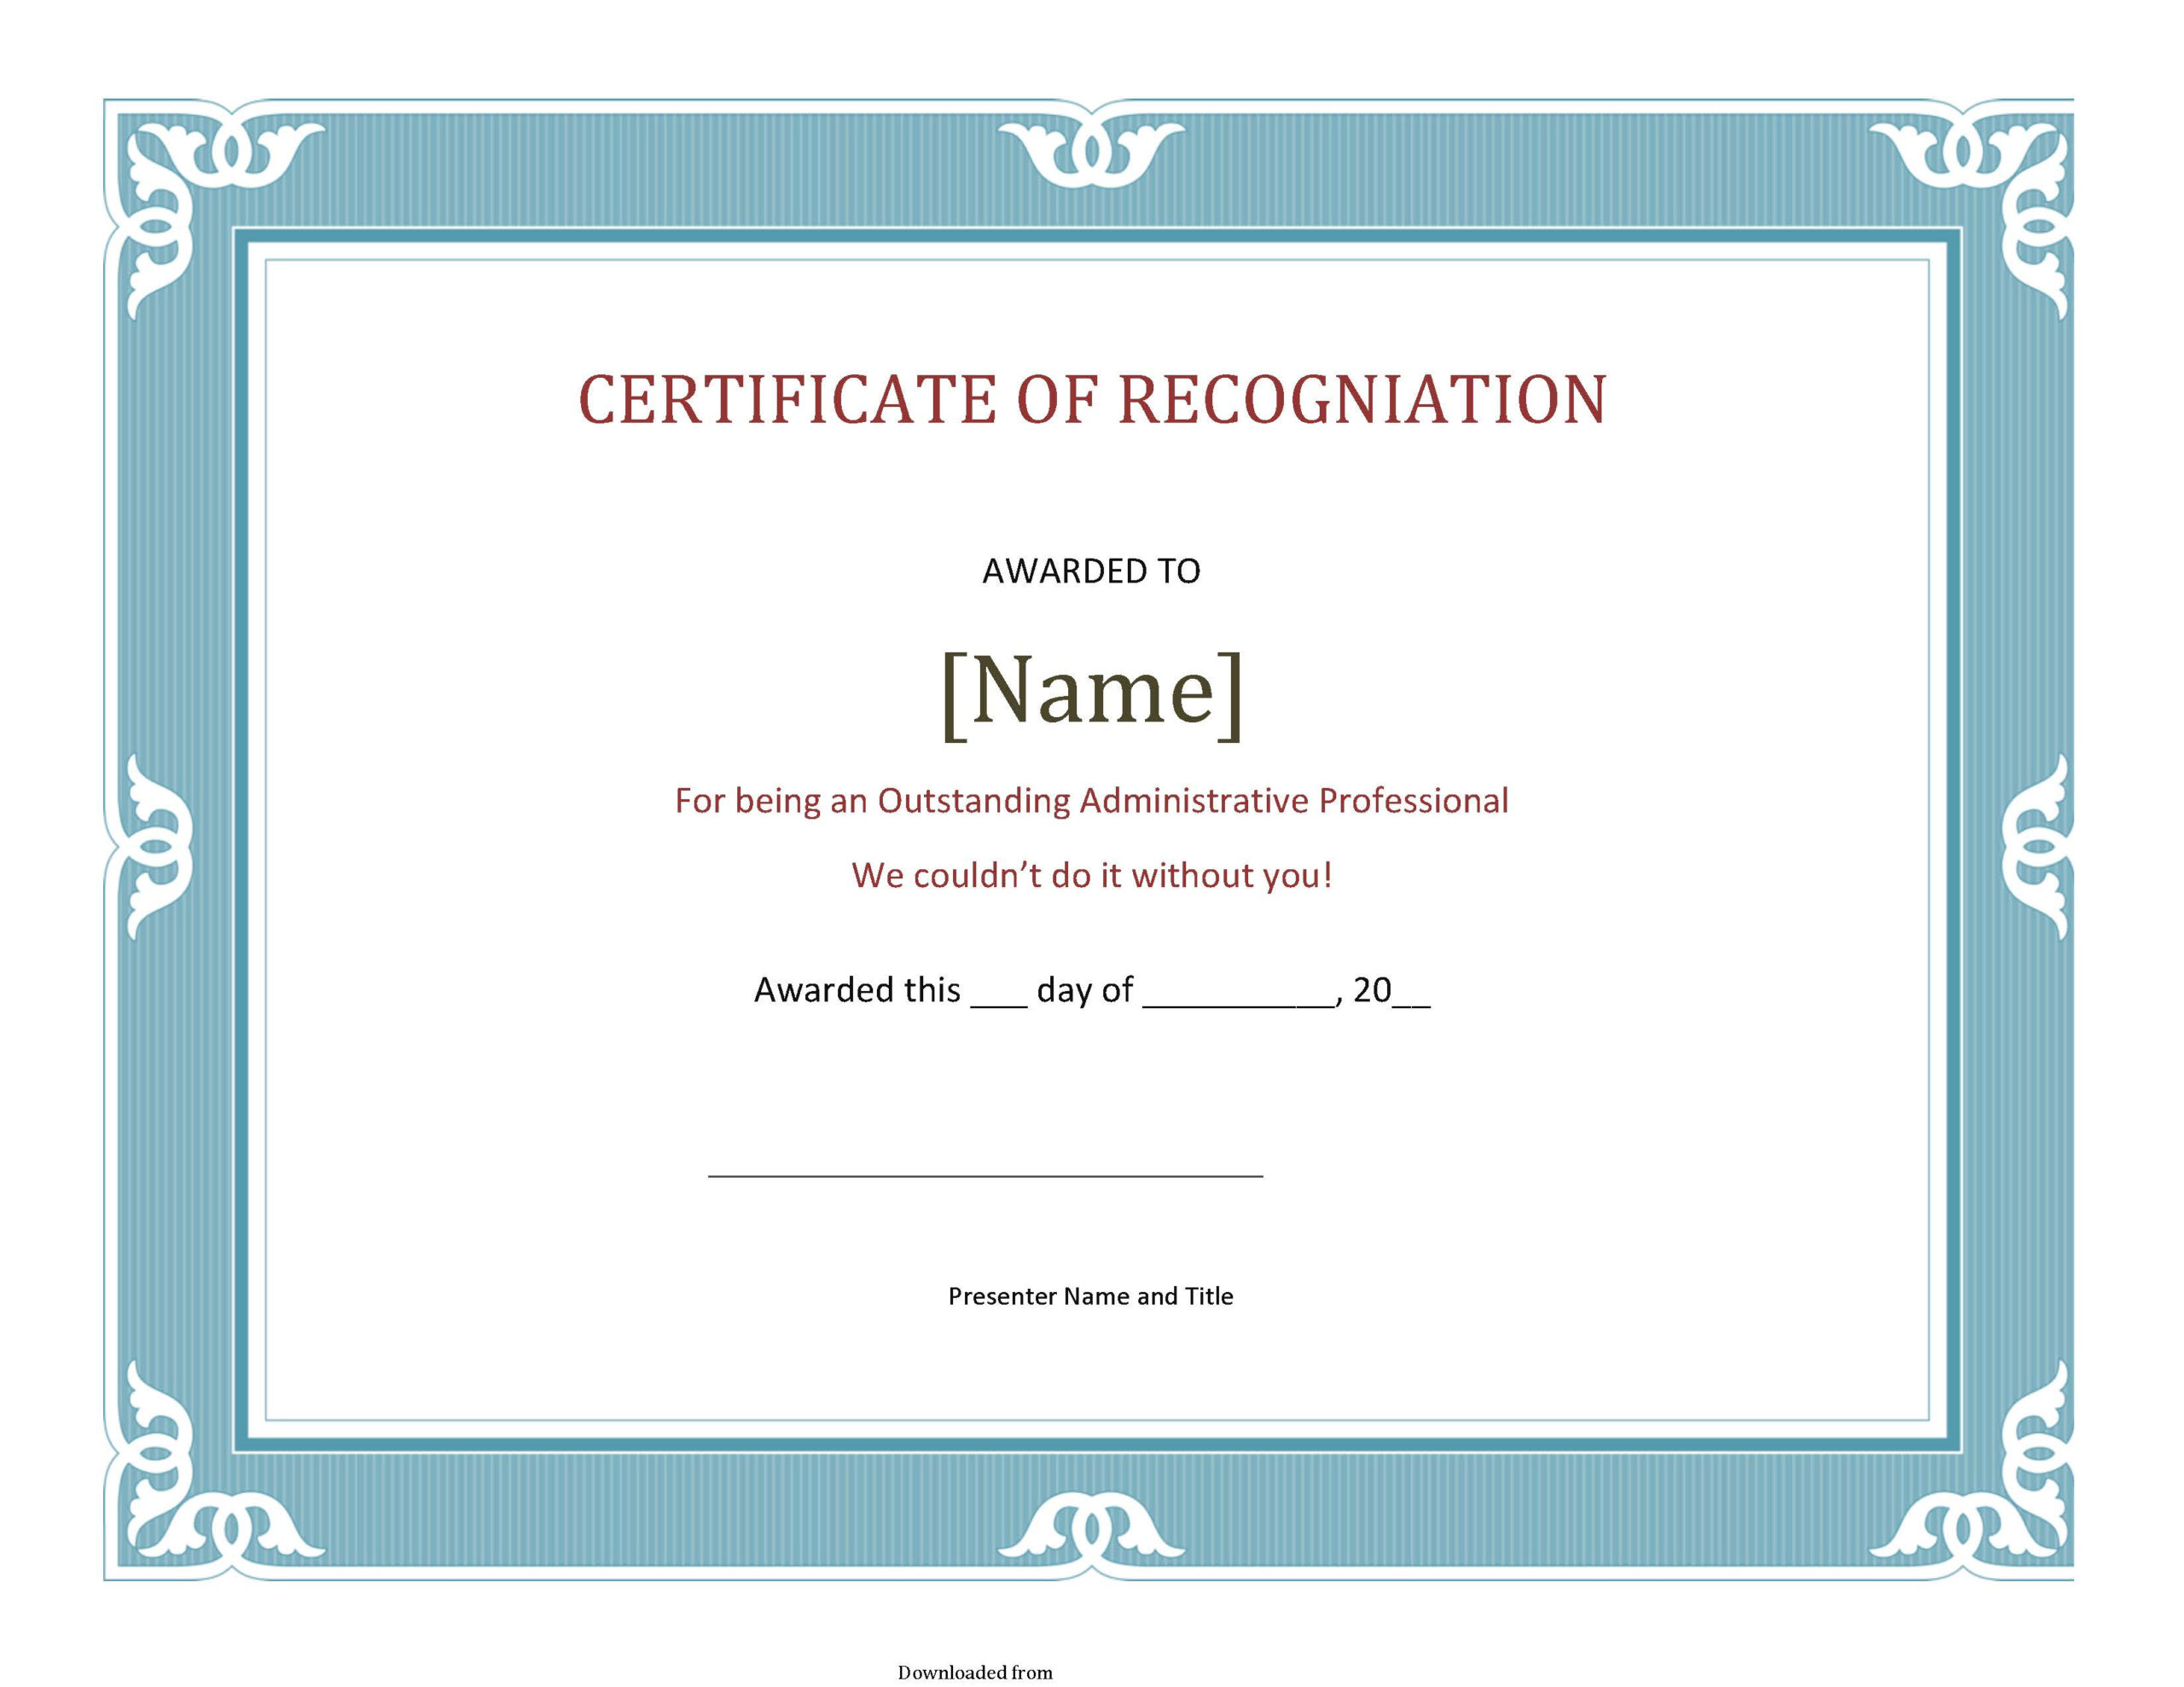 Certificate Of Recognition Template 2  Pdf Format  E pertaining to Printable Certificate Of Recognition Word Template